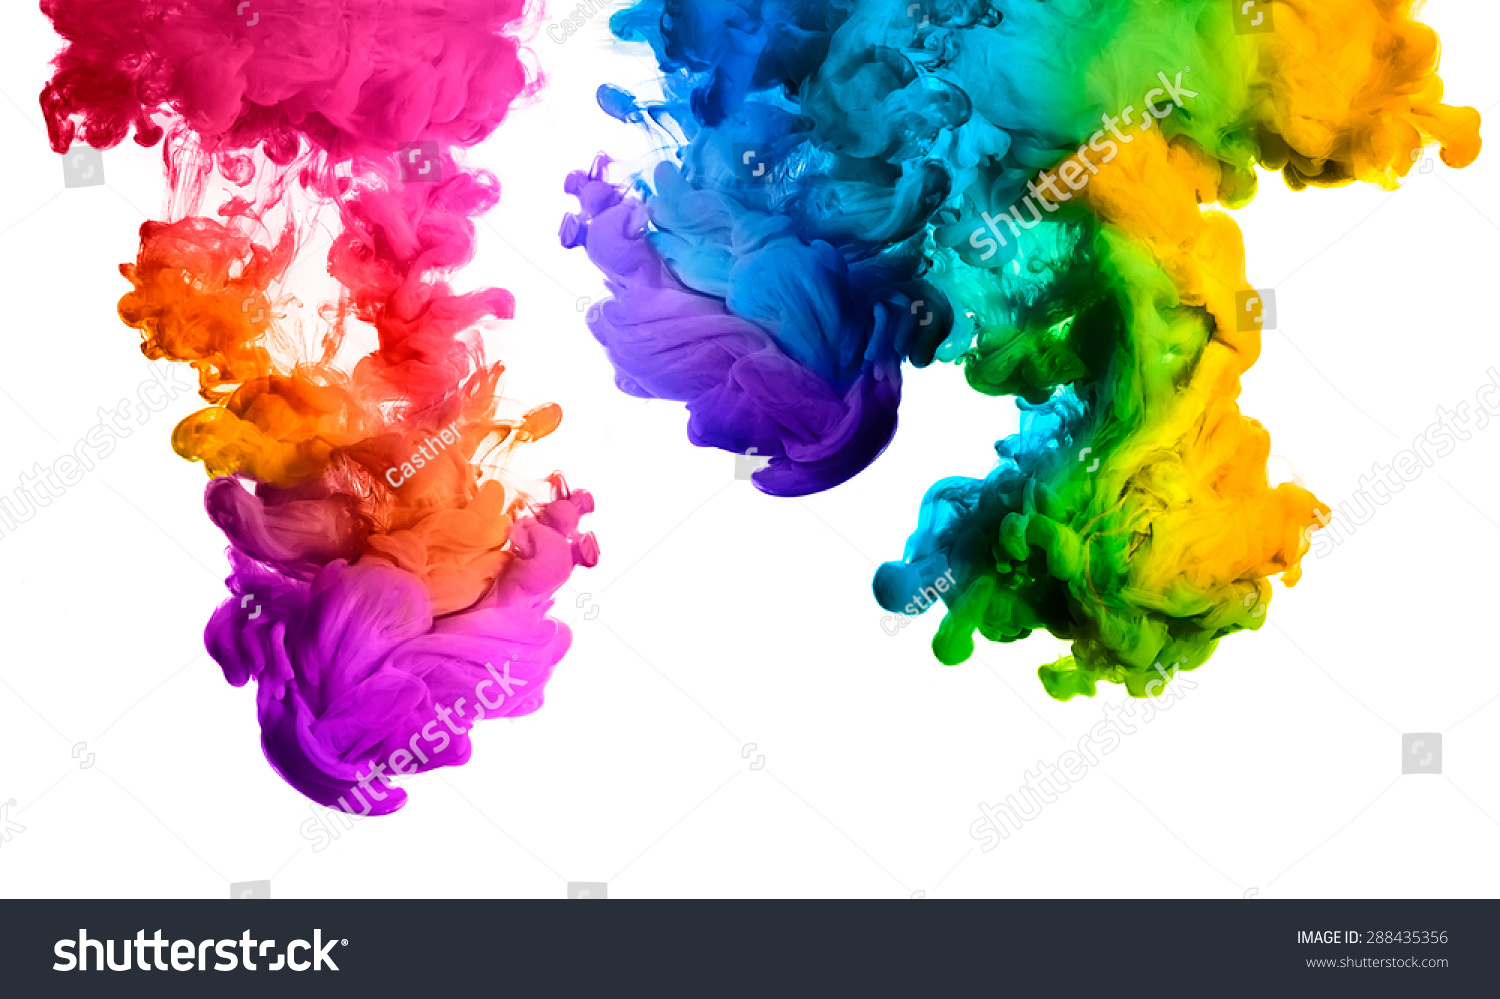 Ink in water isolated on white background. Rainbow of colors #288435356